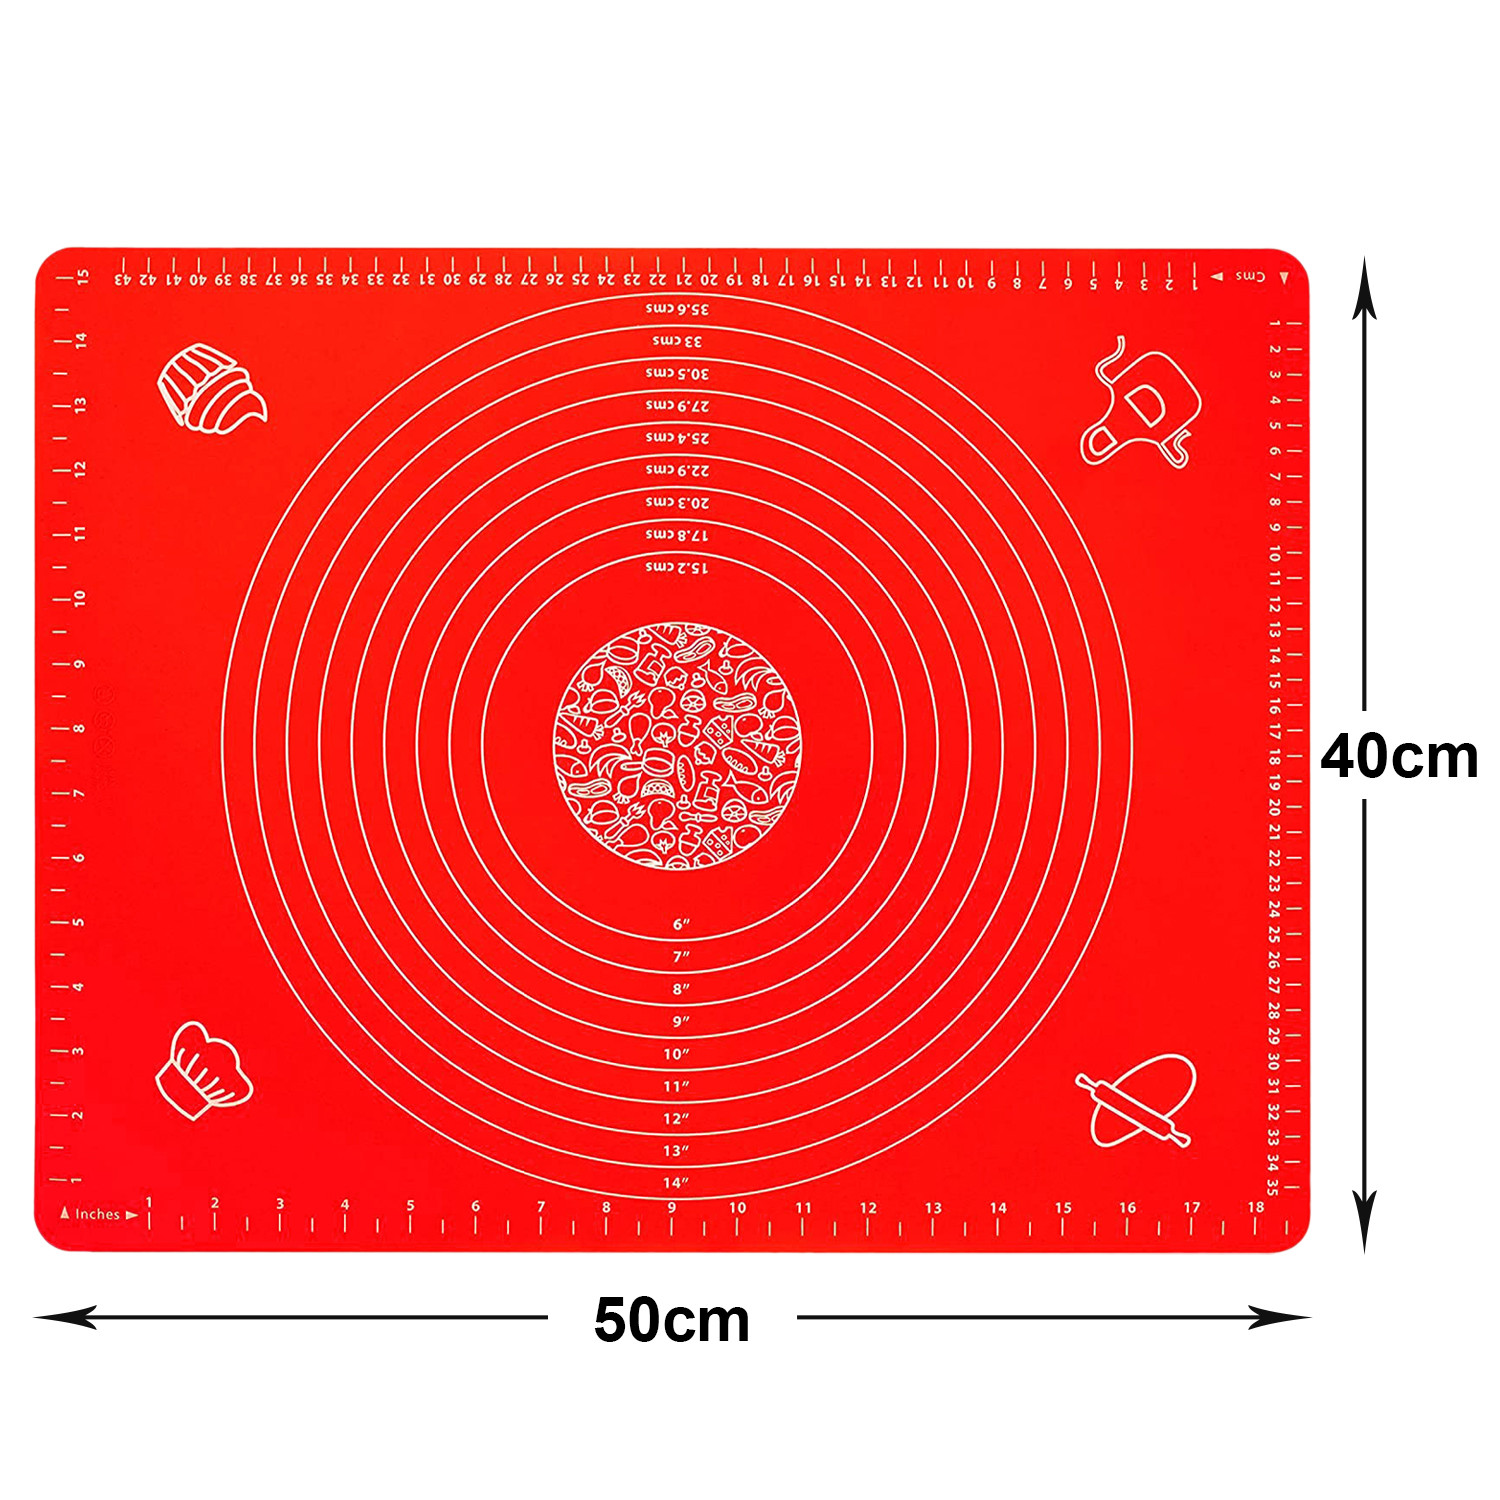 Kuber Industries Baking Mat|Silicone Non-Stick Stretchable Kneading Mat|Fondant Rolling Mat For Kitchen,Roti,Chapati,Cake,19 x 16 Inche (Red)